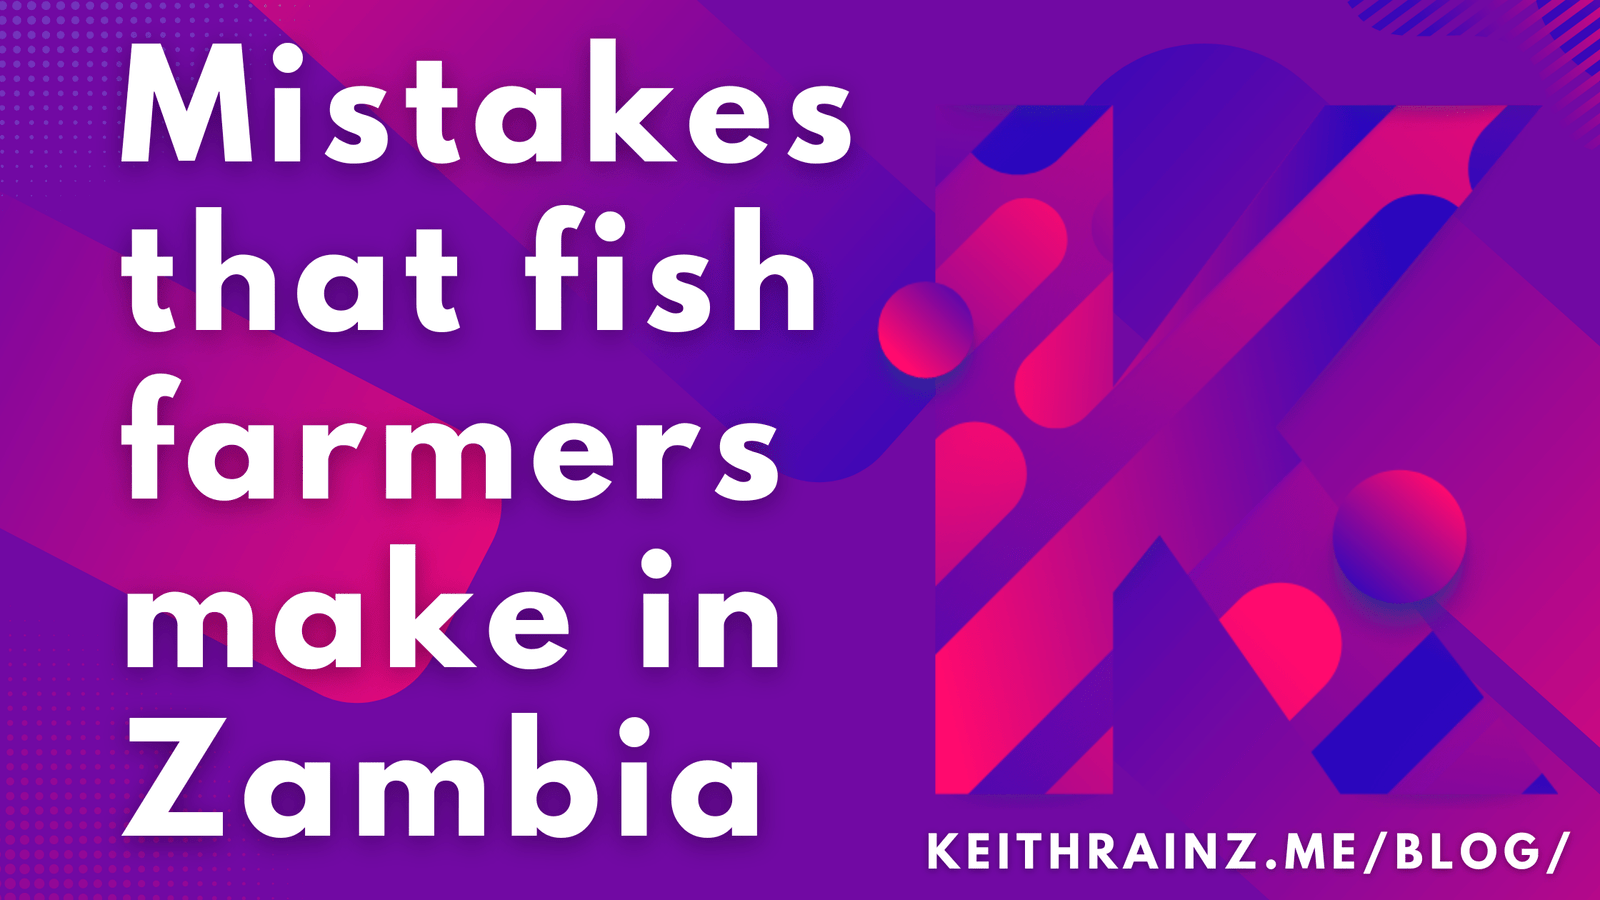 11 Mistakes that fish farmers make in Zambia